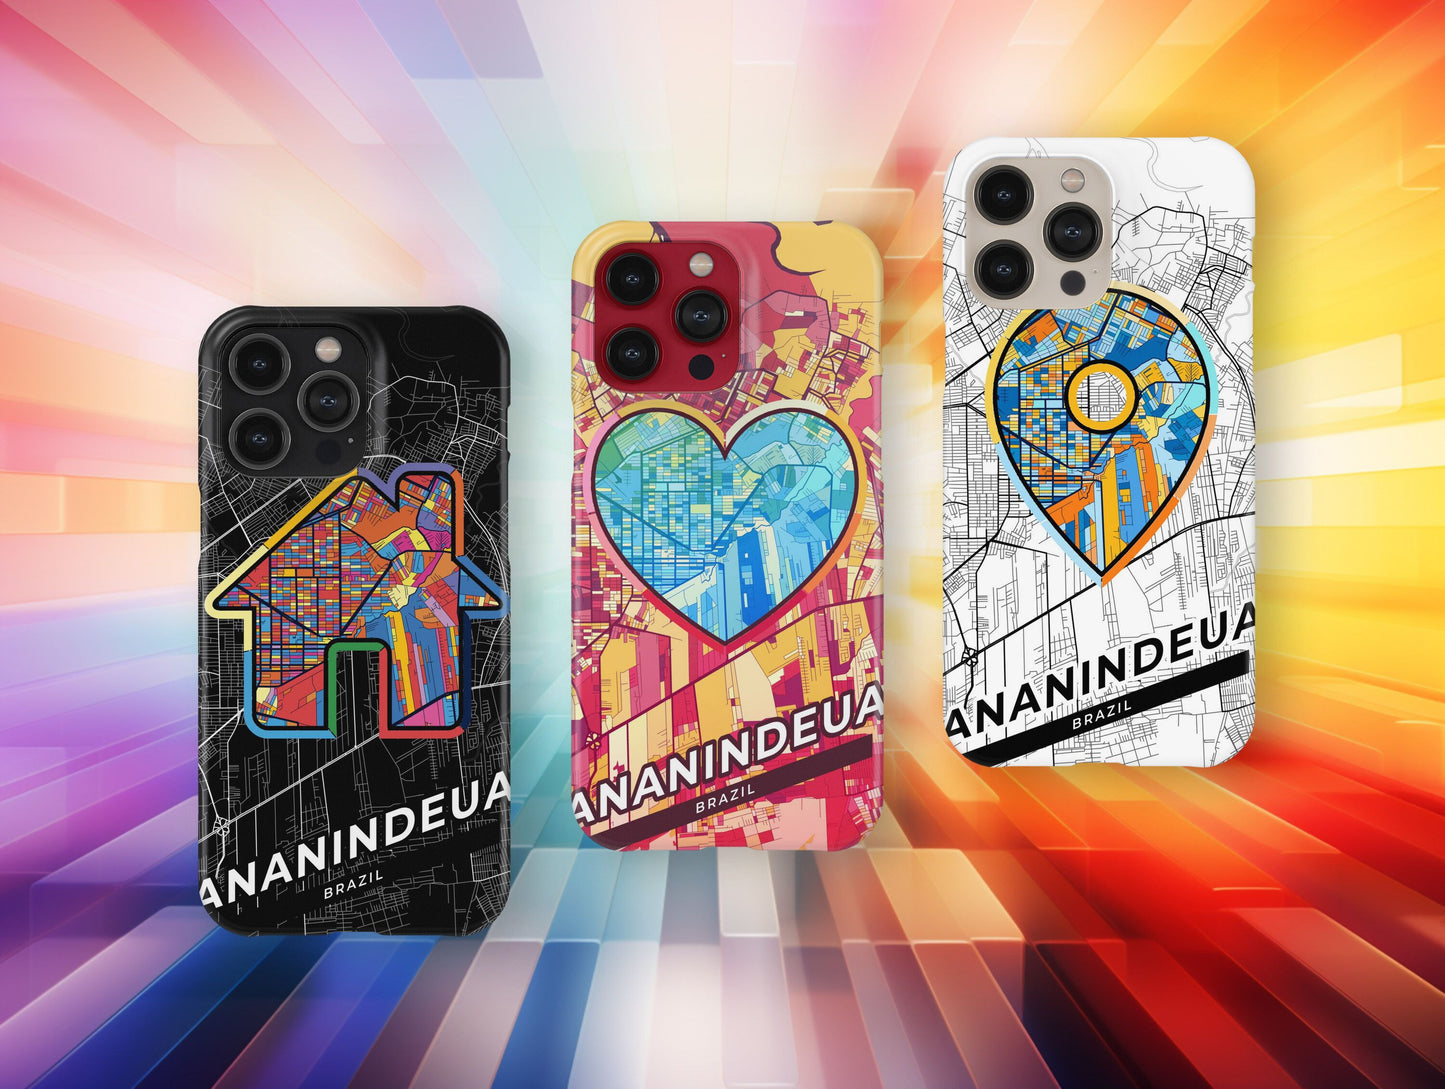 Ananindeua Brazil slim phone case with colorful icon. Birthday, wedding or housewarming gift. Couple match cases.